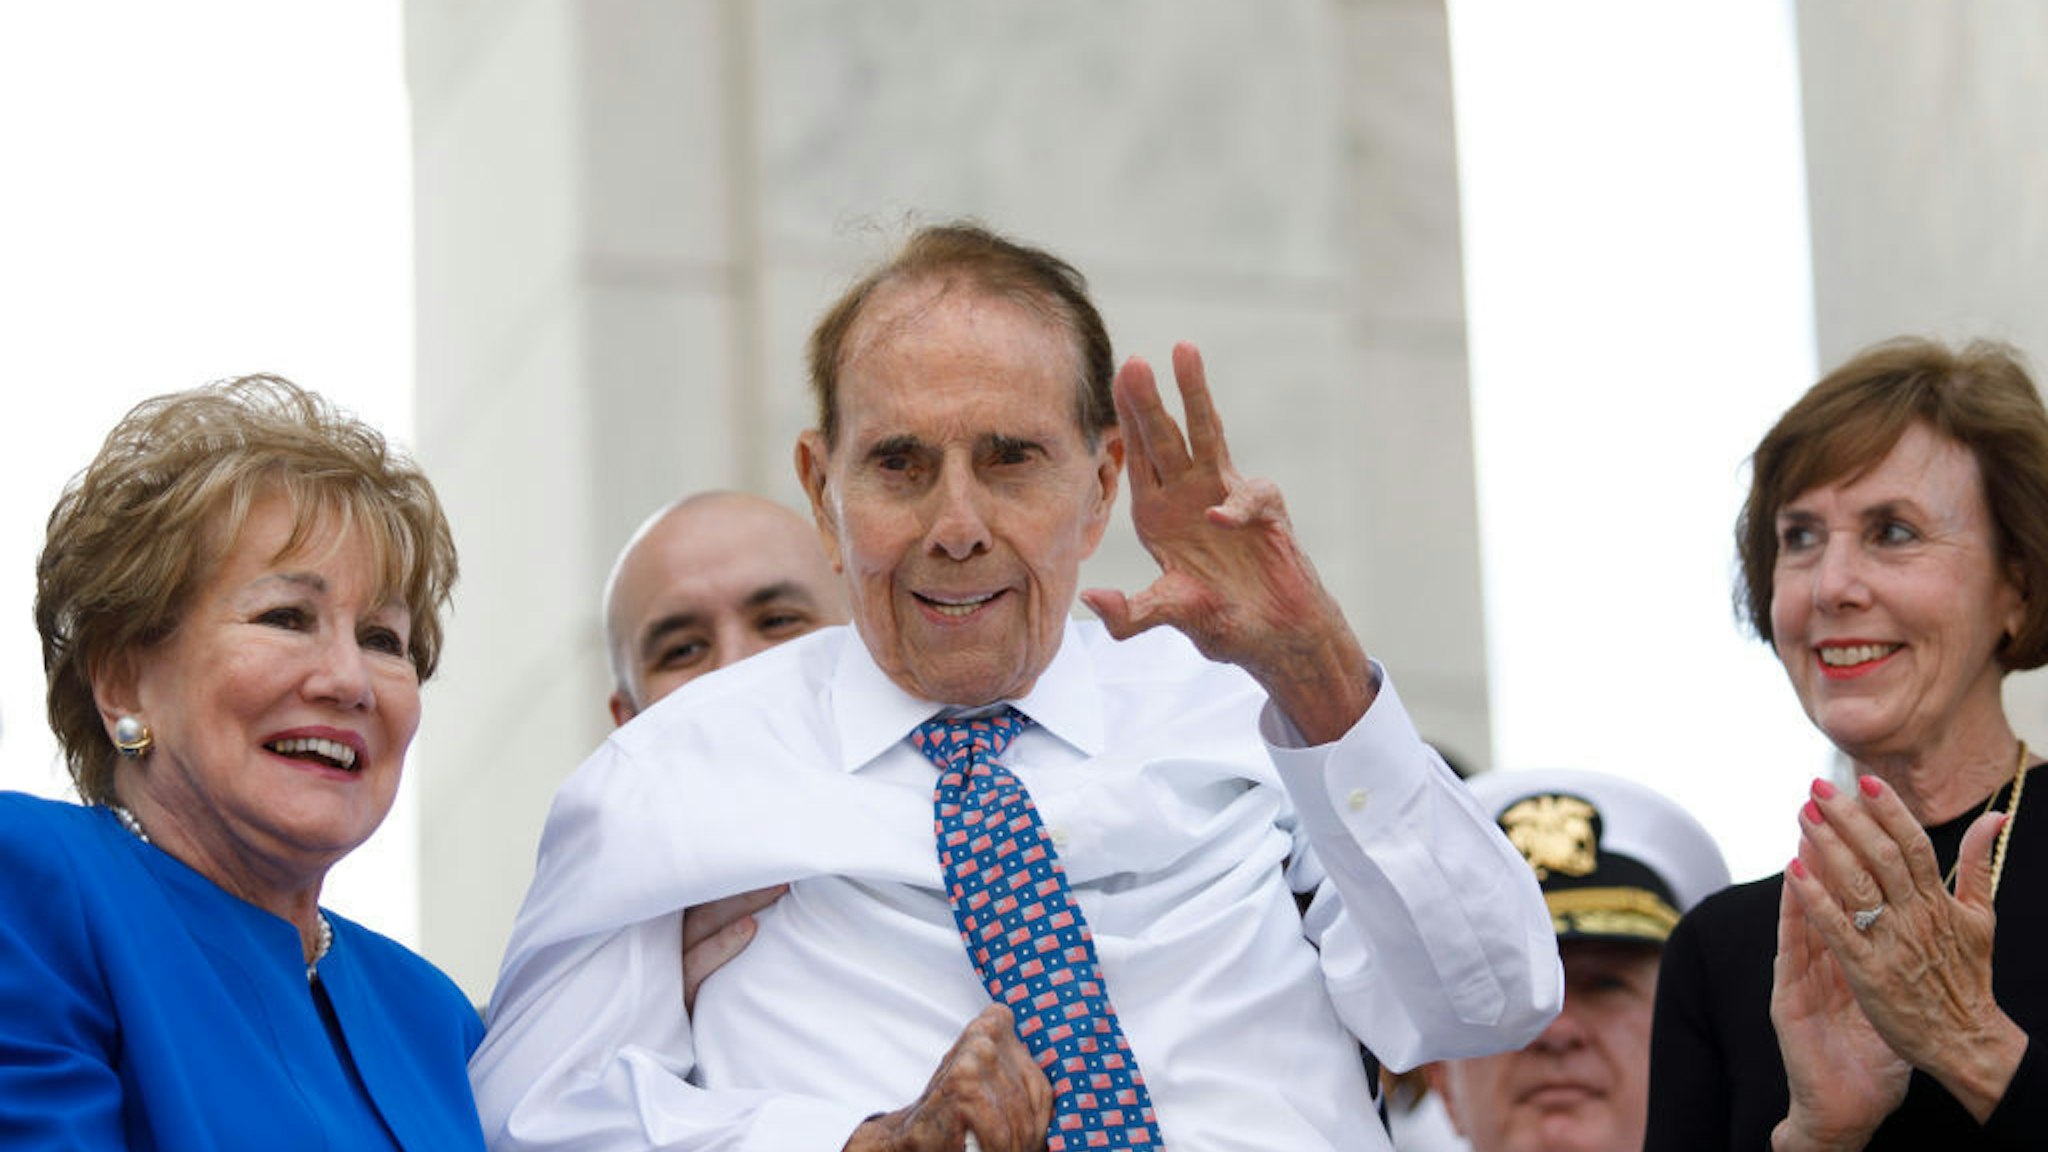 ARLINGTON, VA - MAY 27: Former Senator Bob Dole waves to the crowd after being noted in the audience by Vice President Mike Pence during a Memorial Day ceremony inside the Cemetery Amphitheater at Arlington National Cemetery on May 27, 2019 in Arlington, Virginia. (Photo by Tom Brenner/Getty Images)